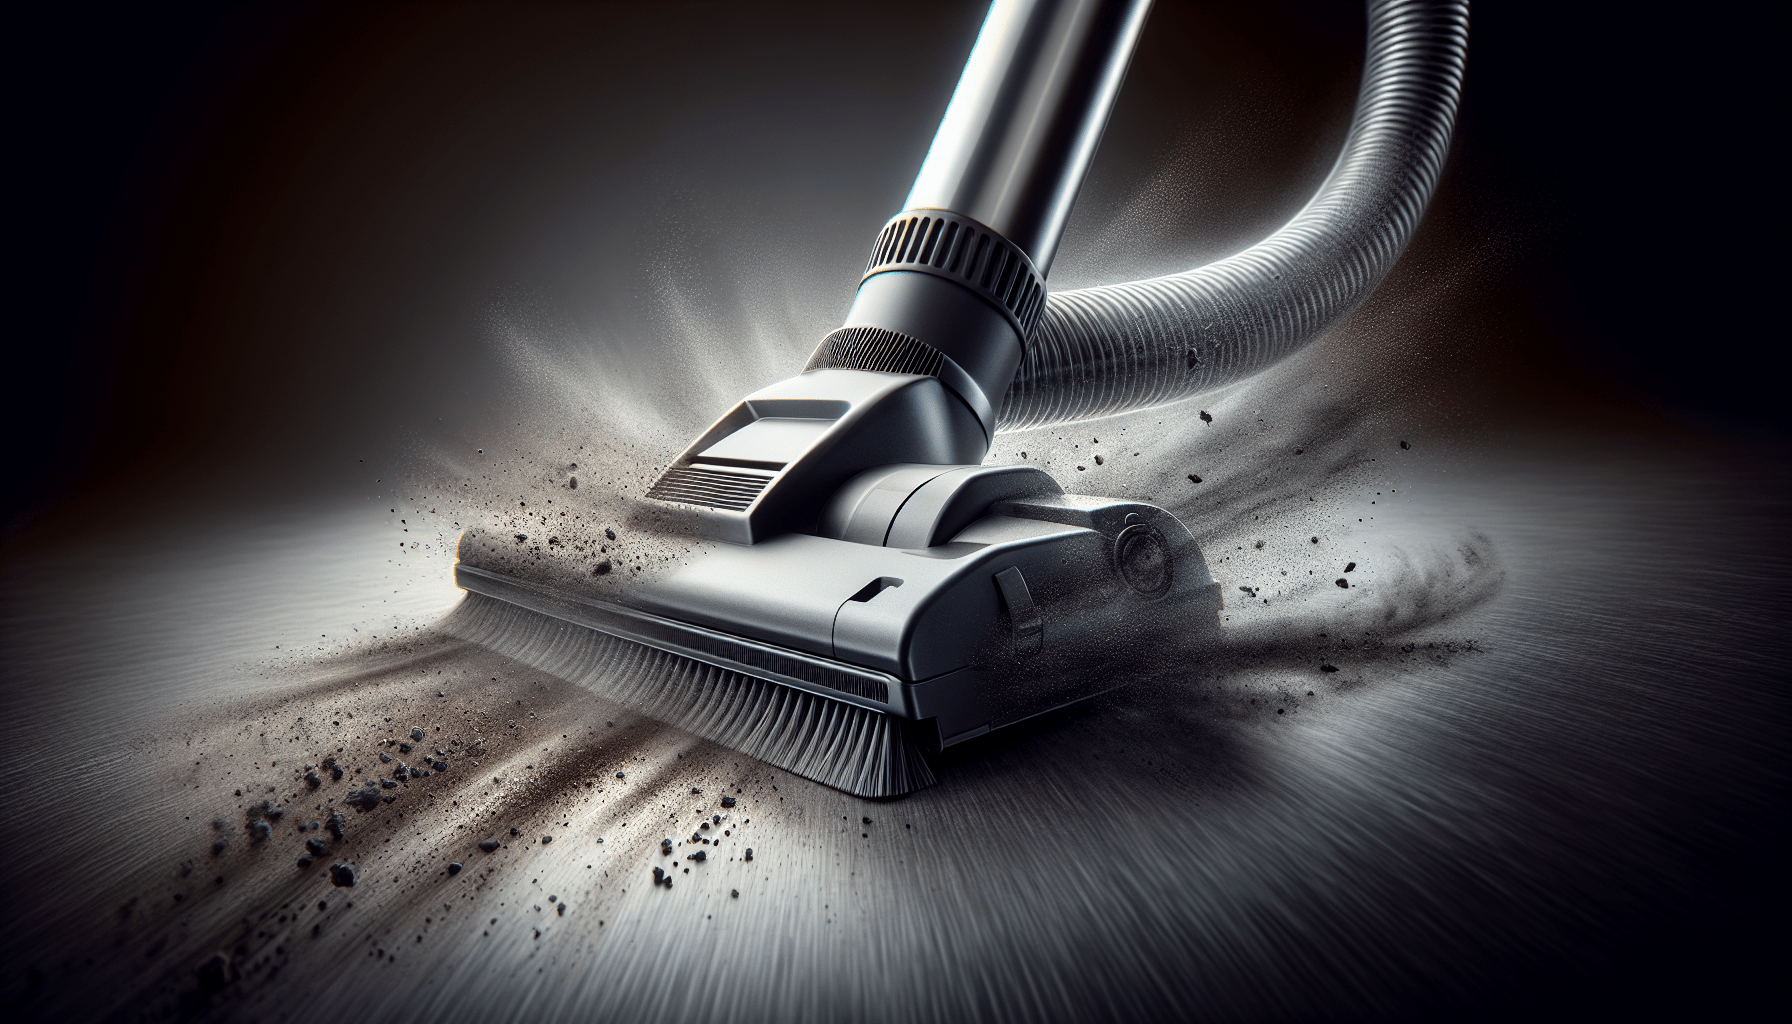 Do Dyson Vacuums Have The Best Suction?